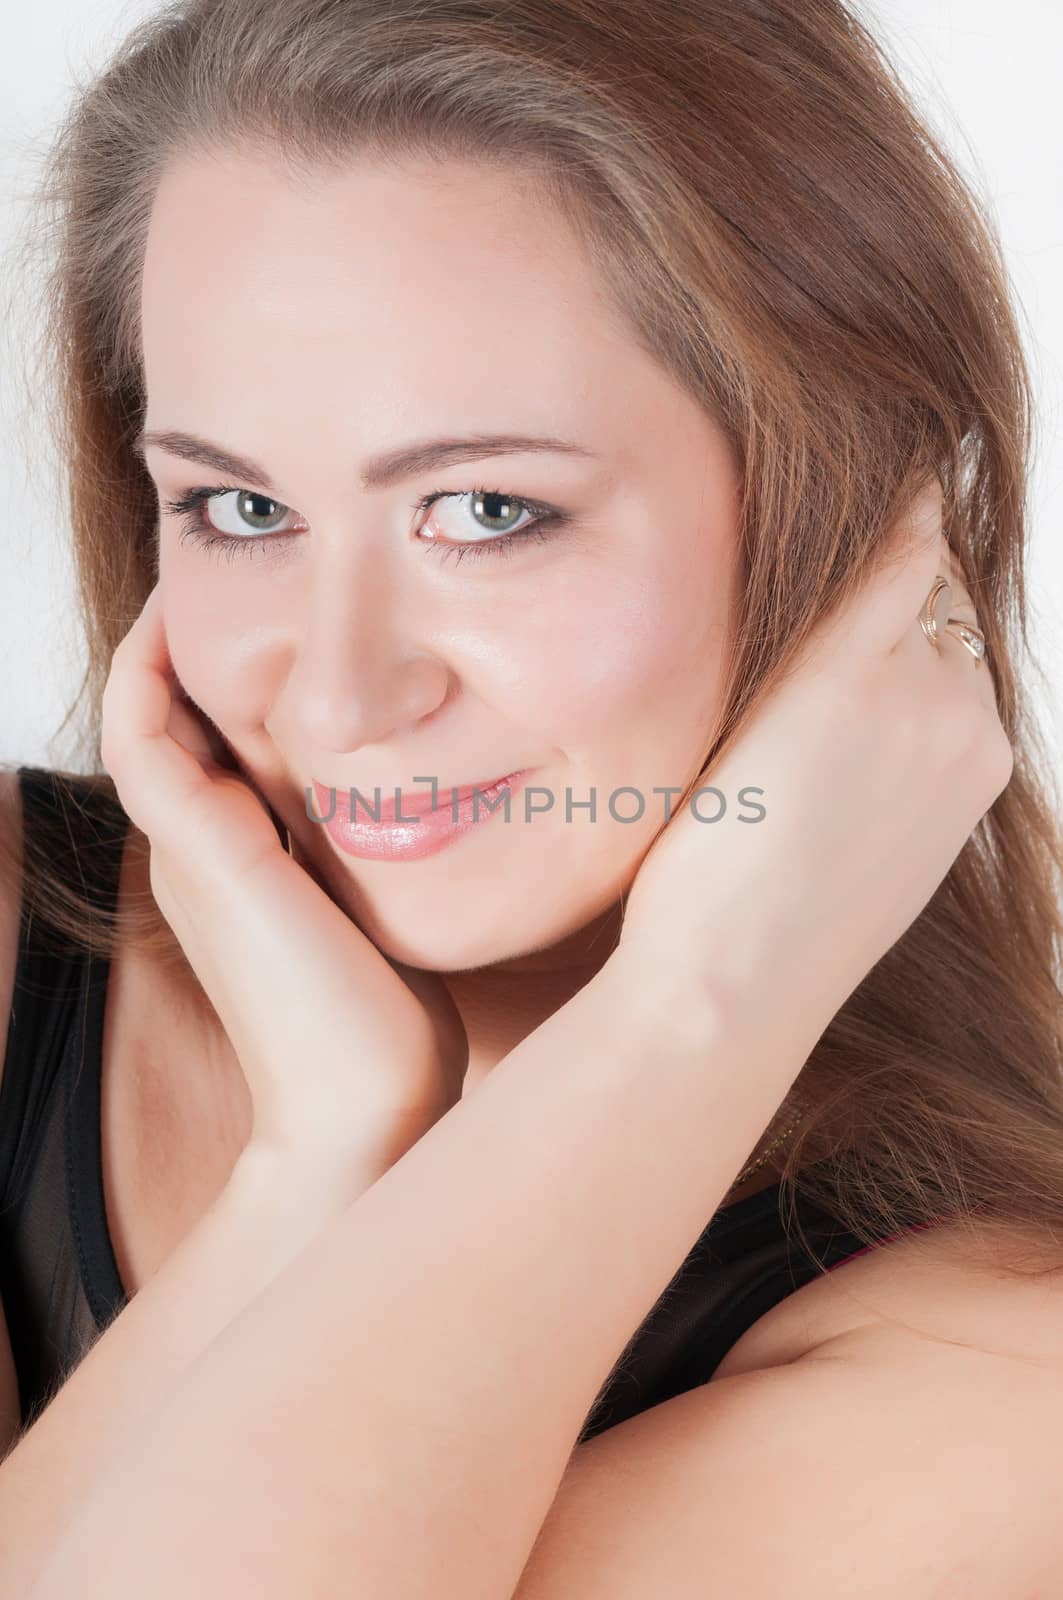 Cheerful young woman with fresh clear skin